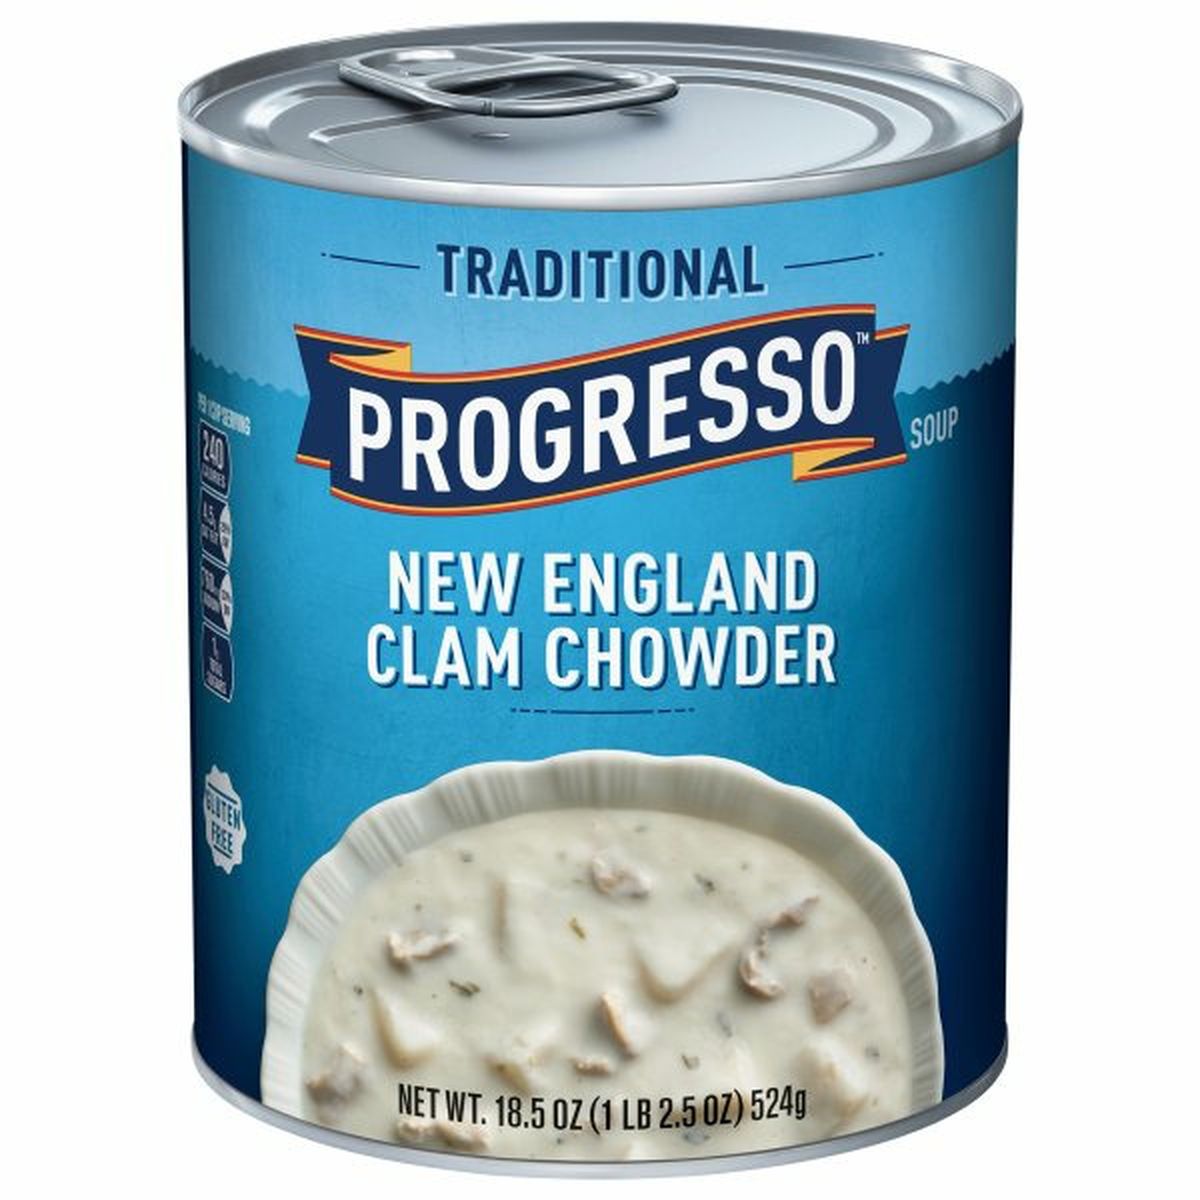 Calories in Progresso Soup, New England Clam Chowder, Traditional